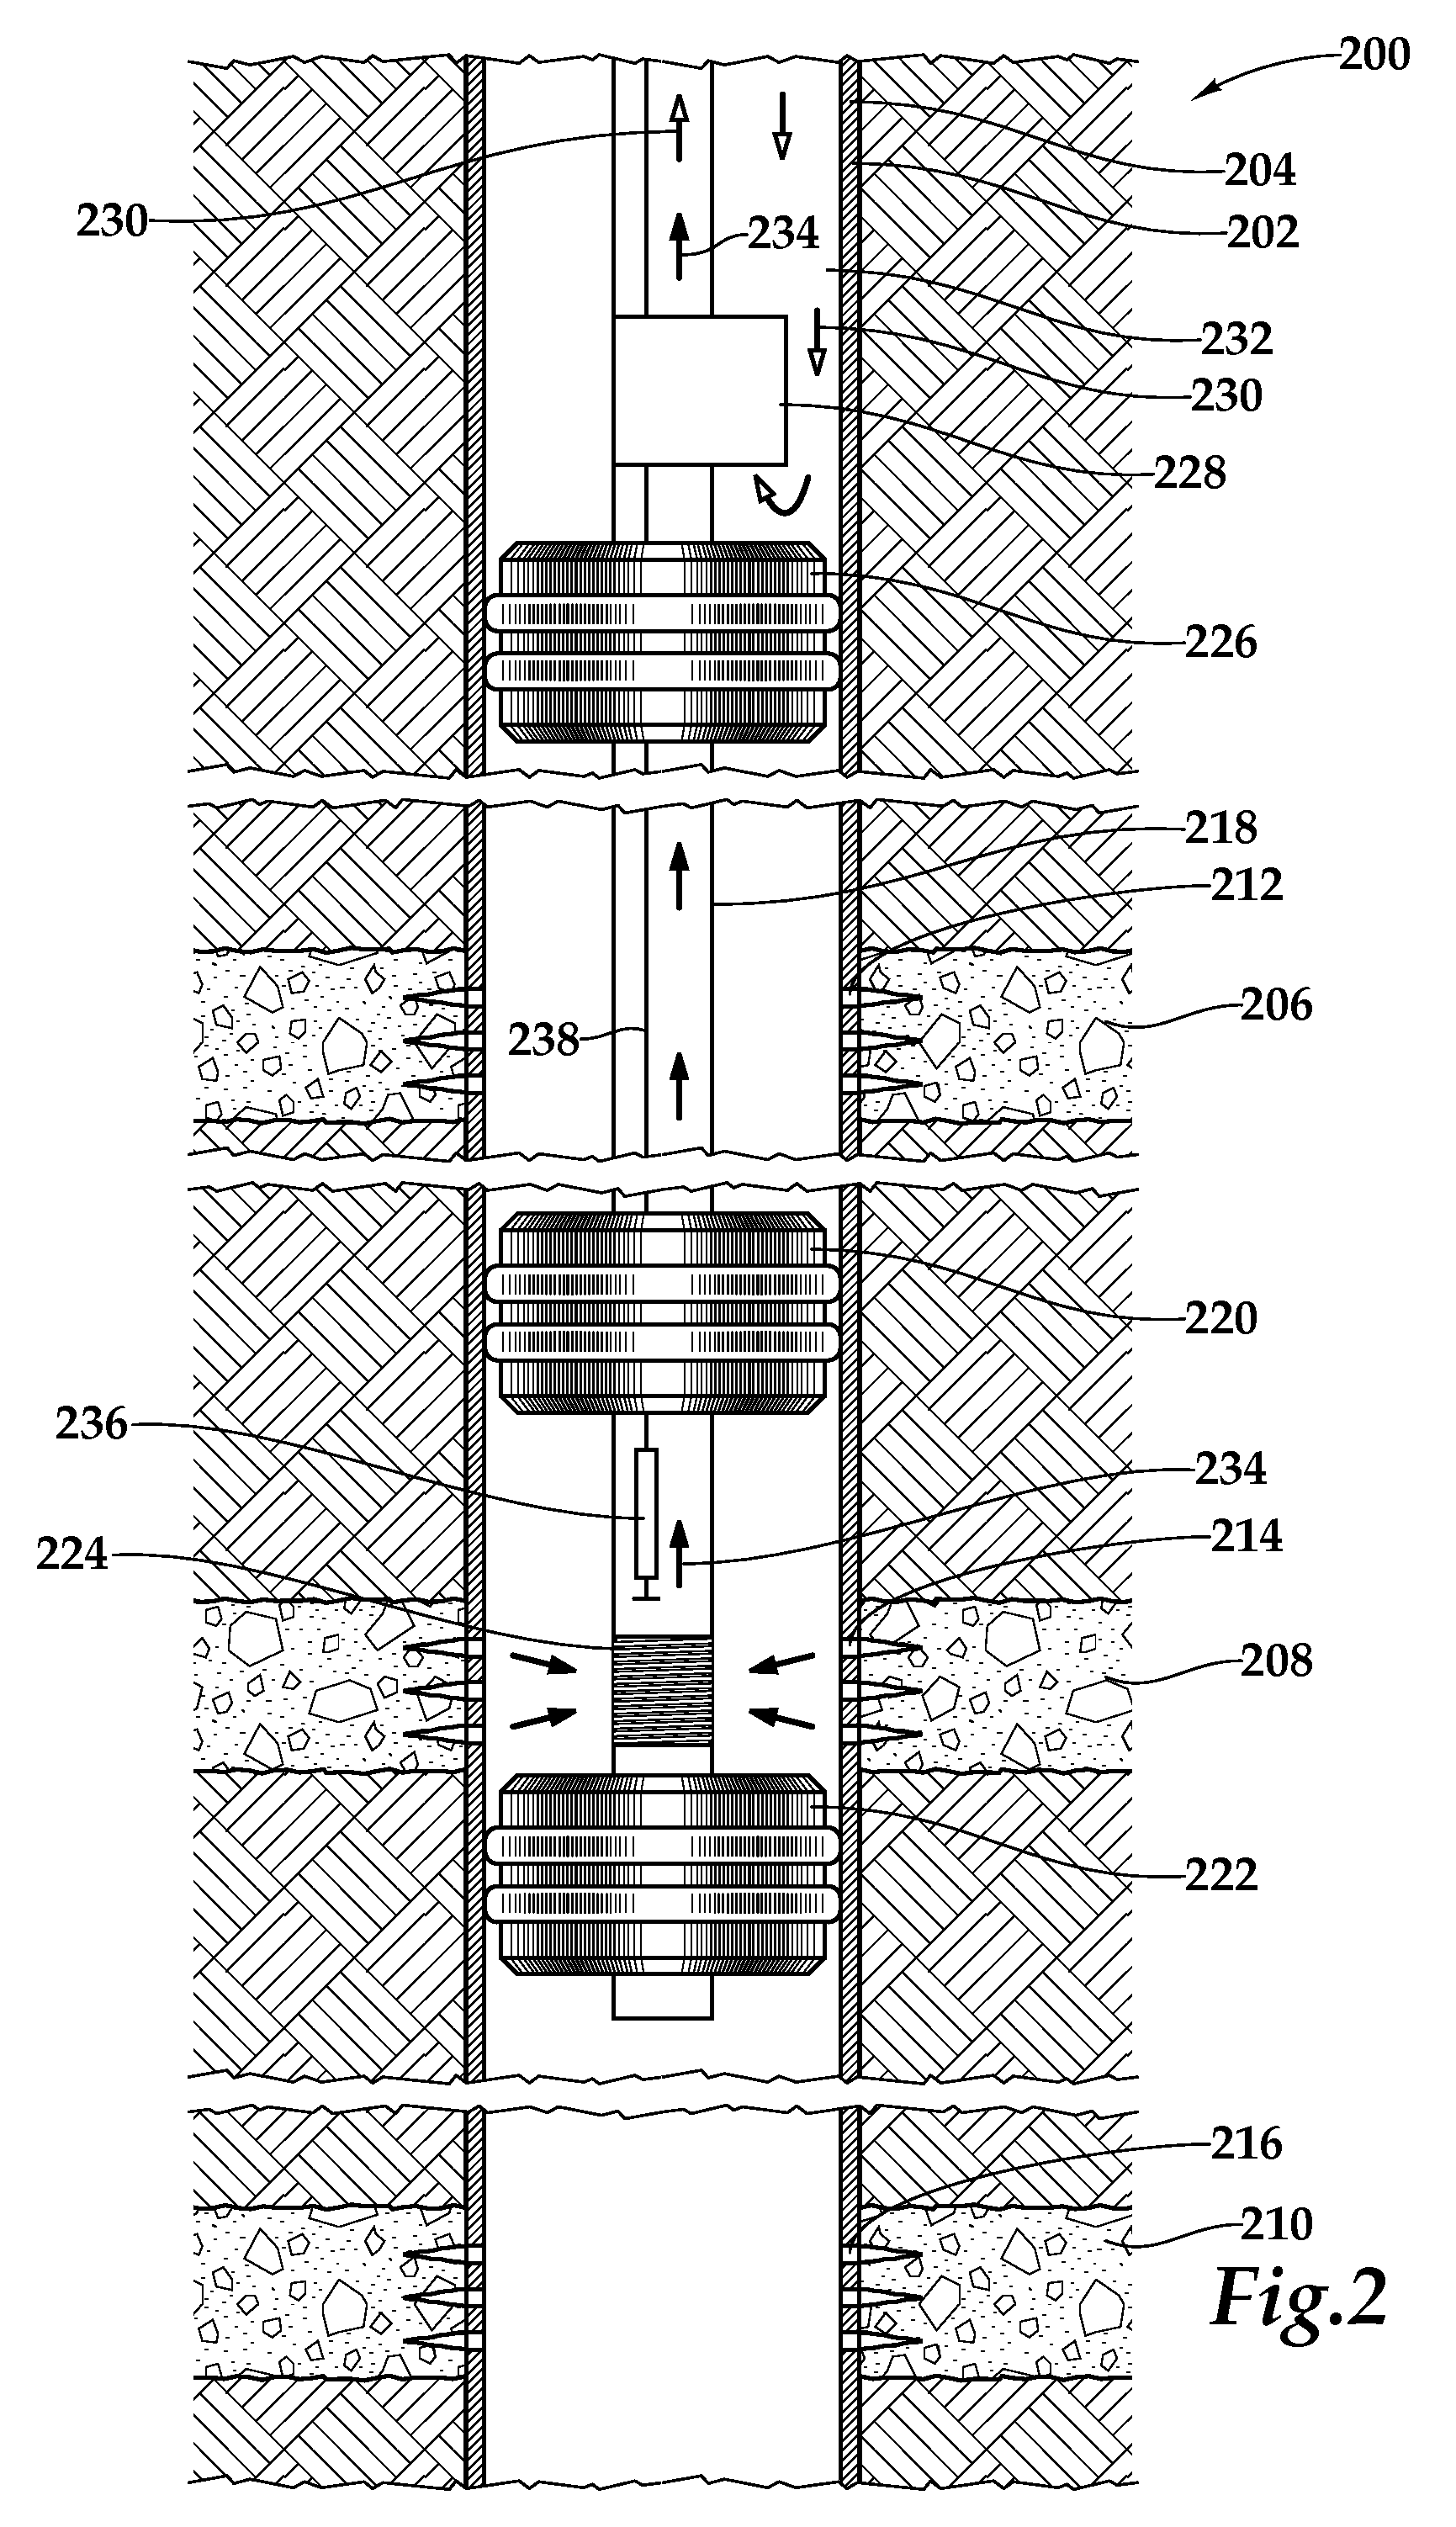 Multi-zone formation fluid evaluation system and method for use of same